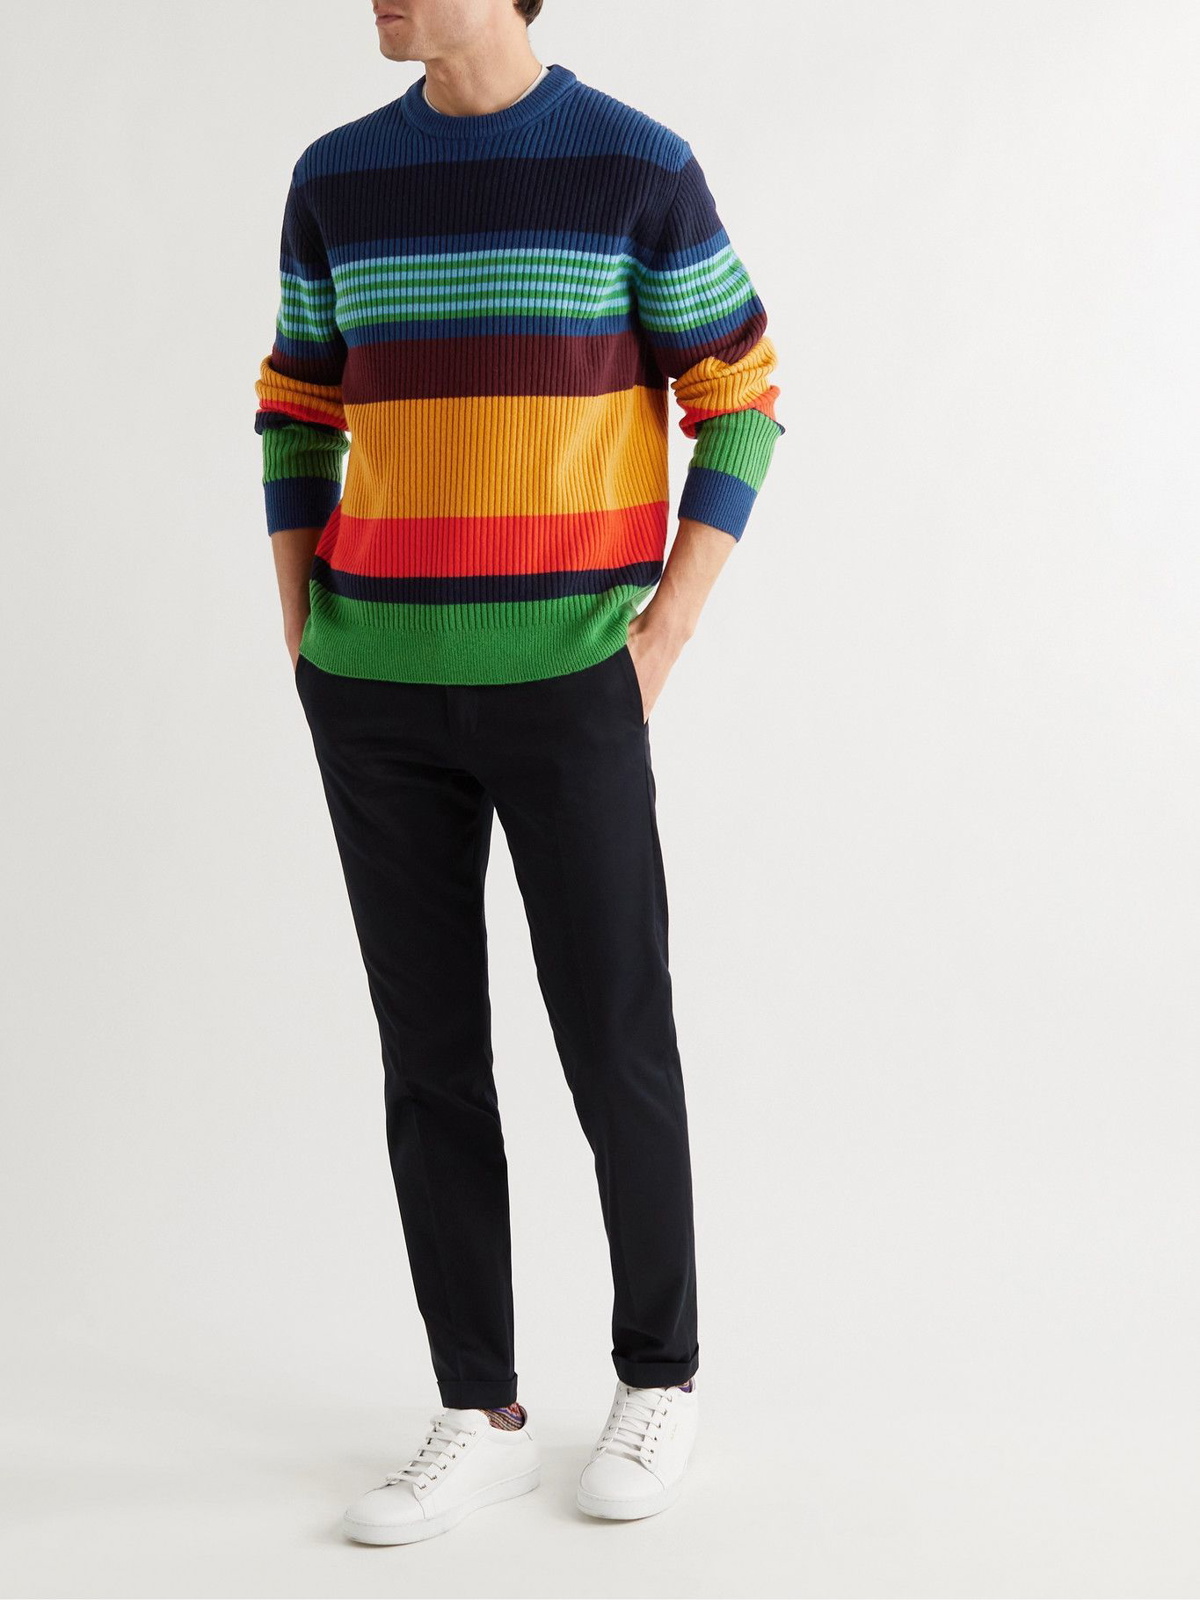 PAUL SMITH - Striped Ribbed Wool Sweater - Multi Paul Smith